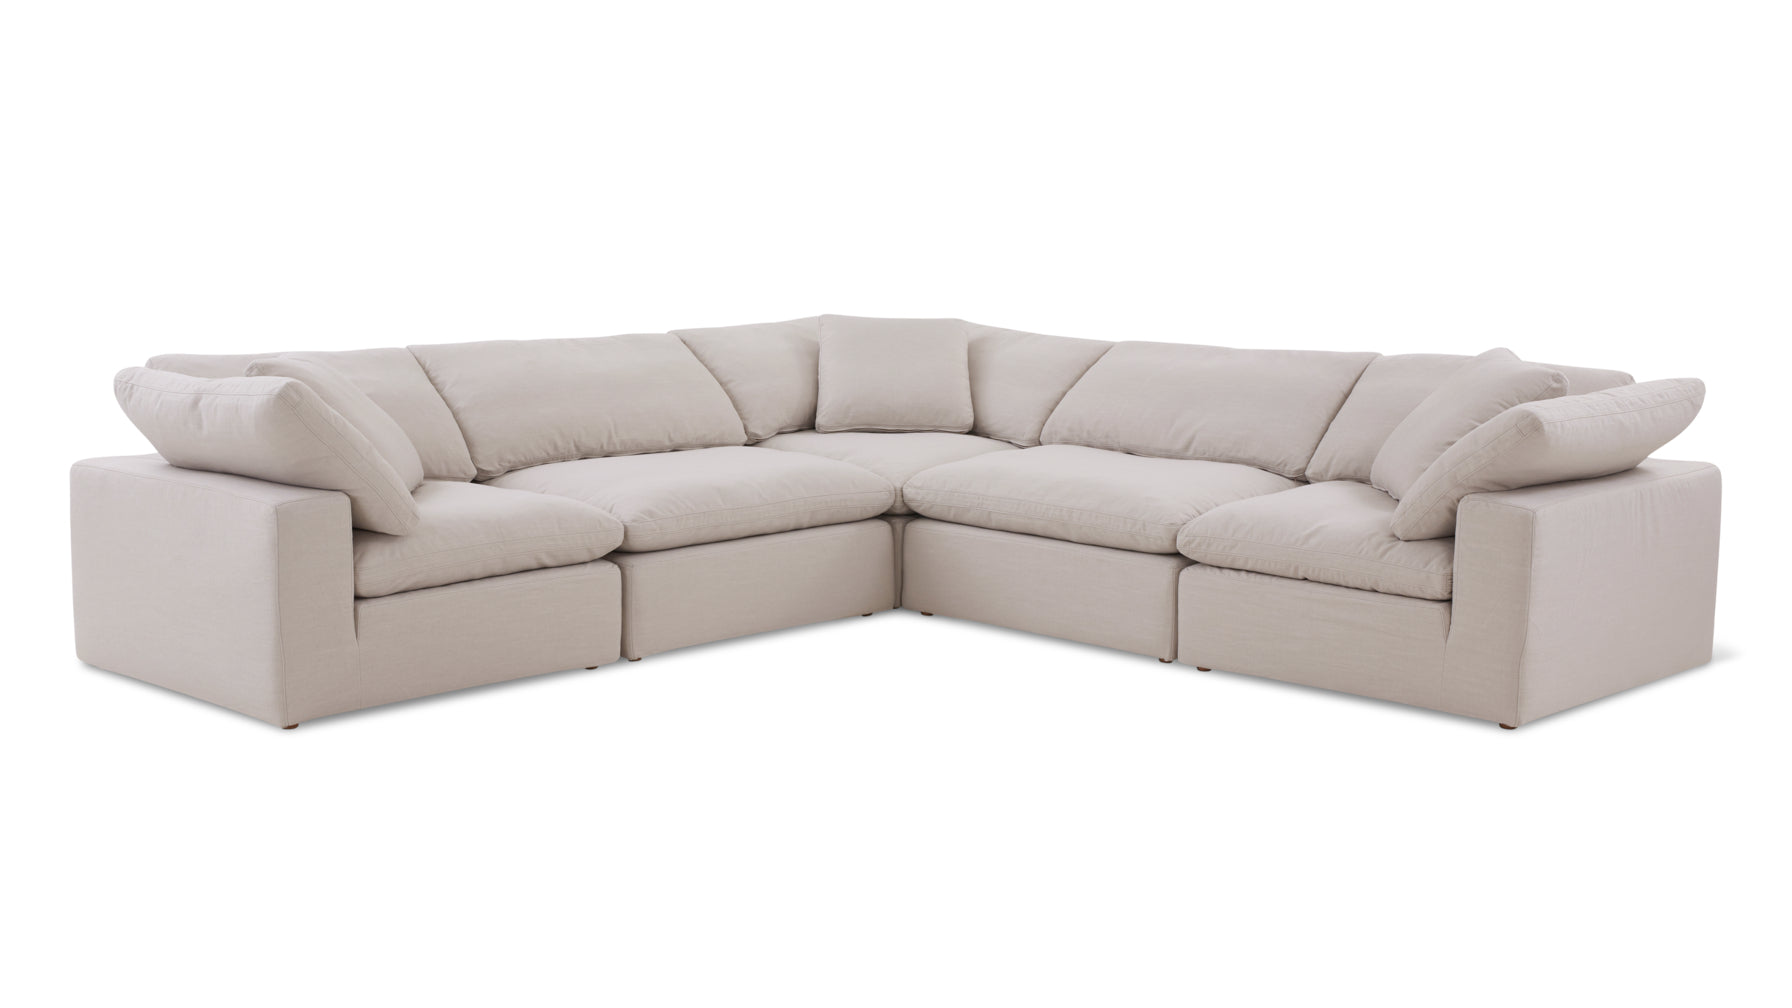 Movie Night™ 5-Piece Modular Sectional Closed, Standard, Clay - Image 4